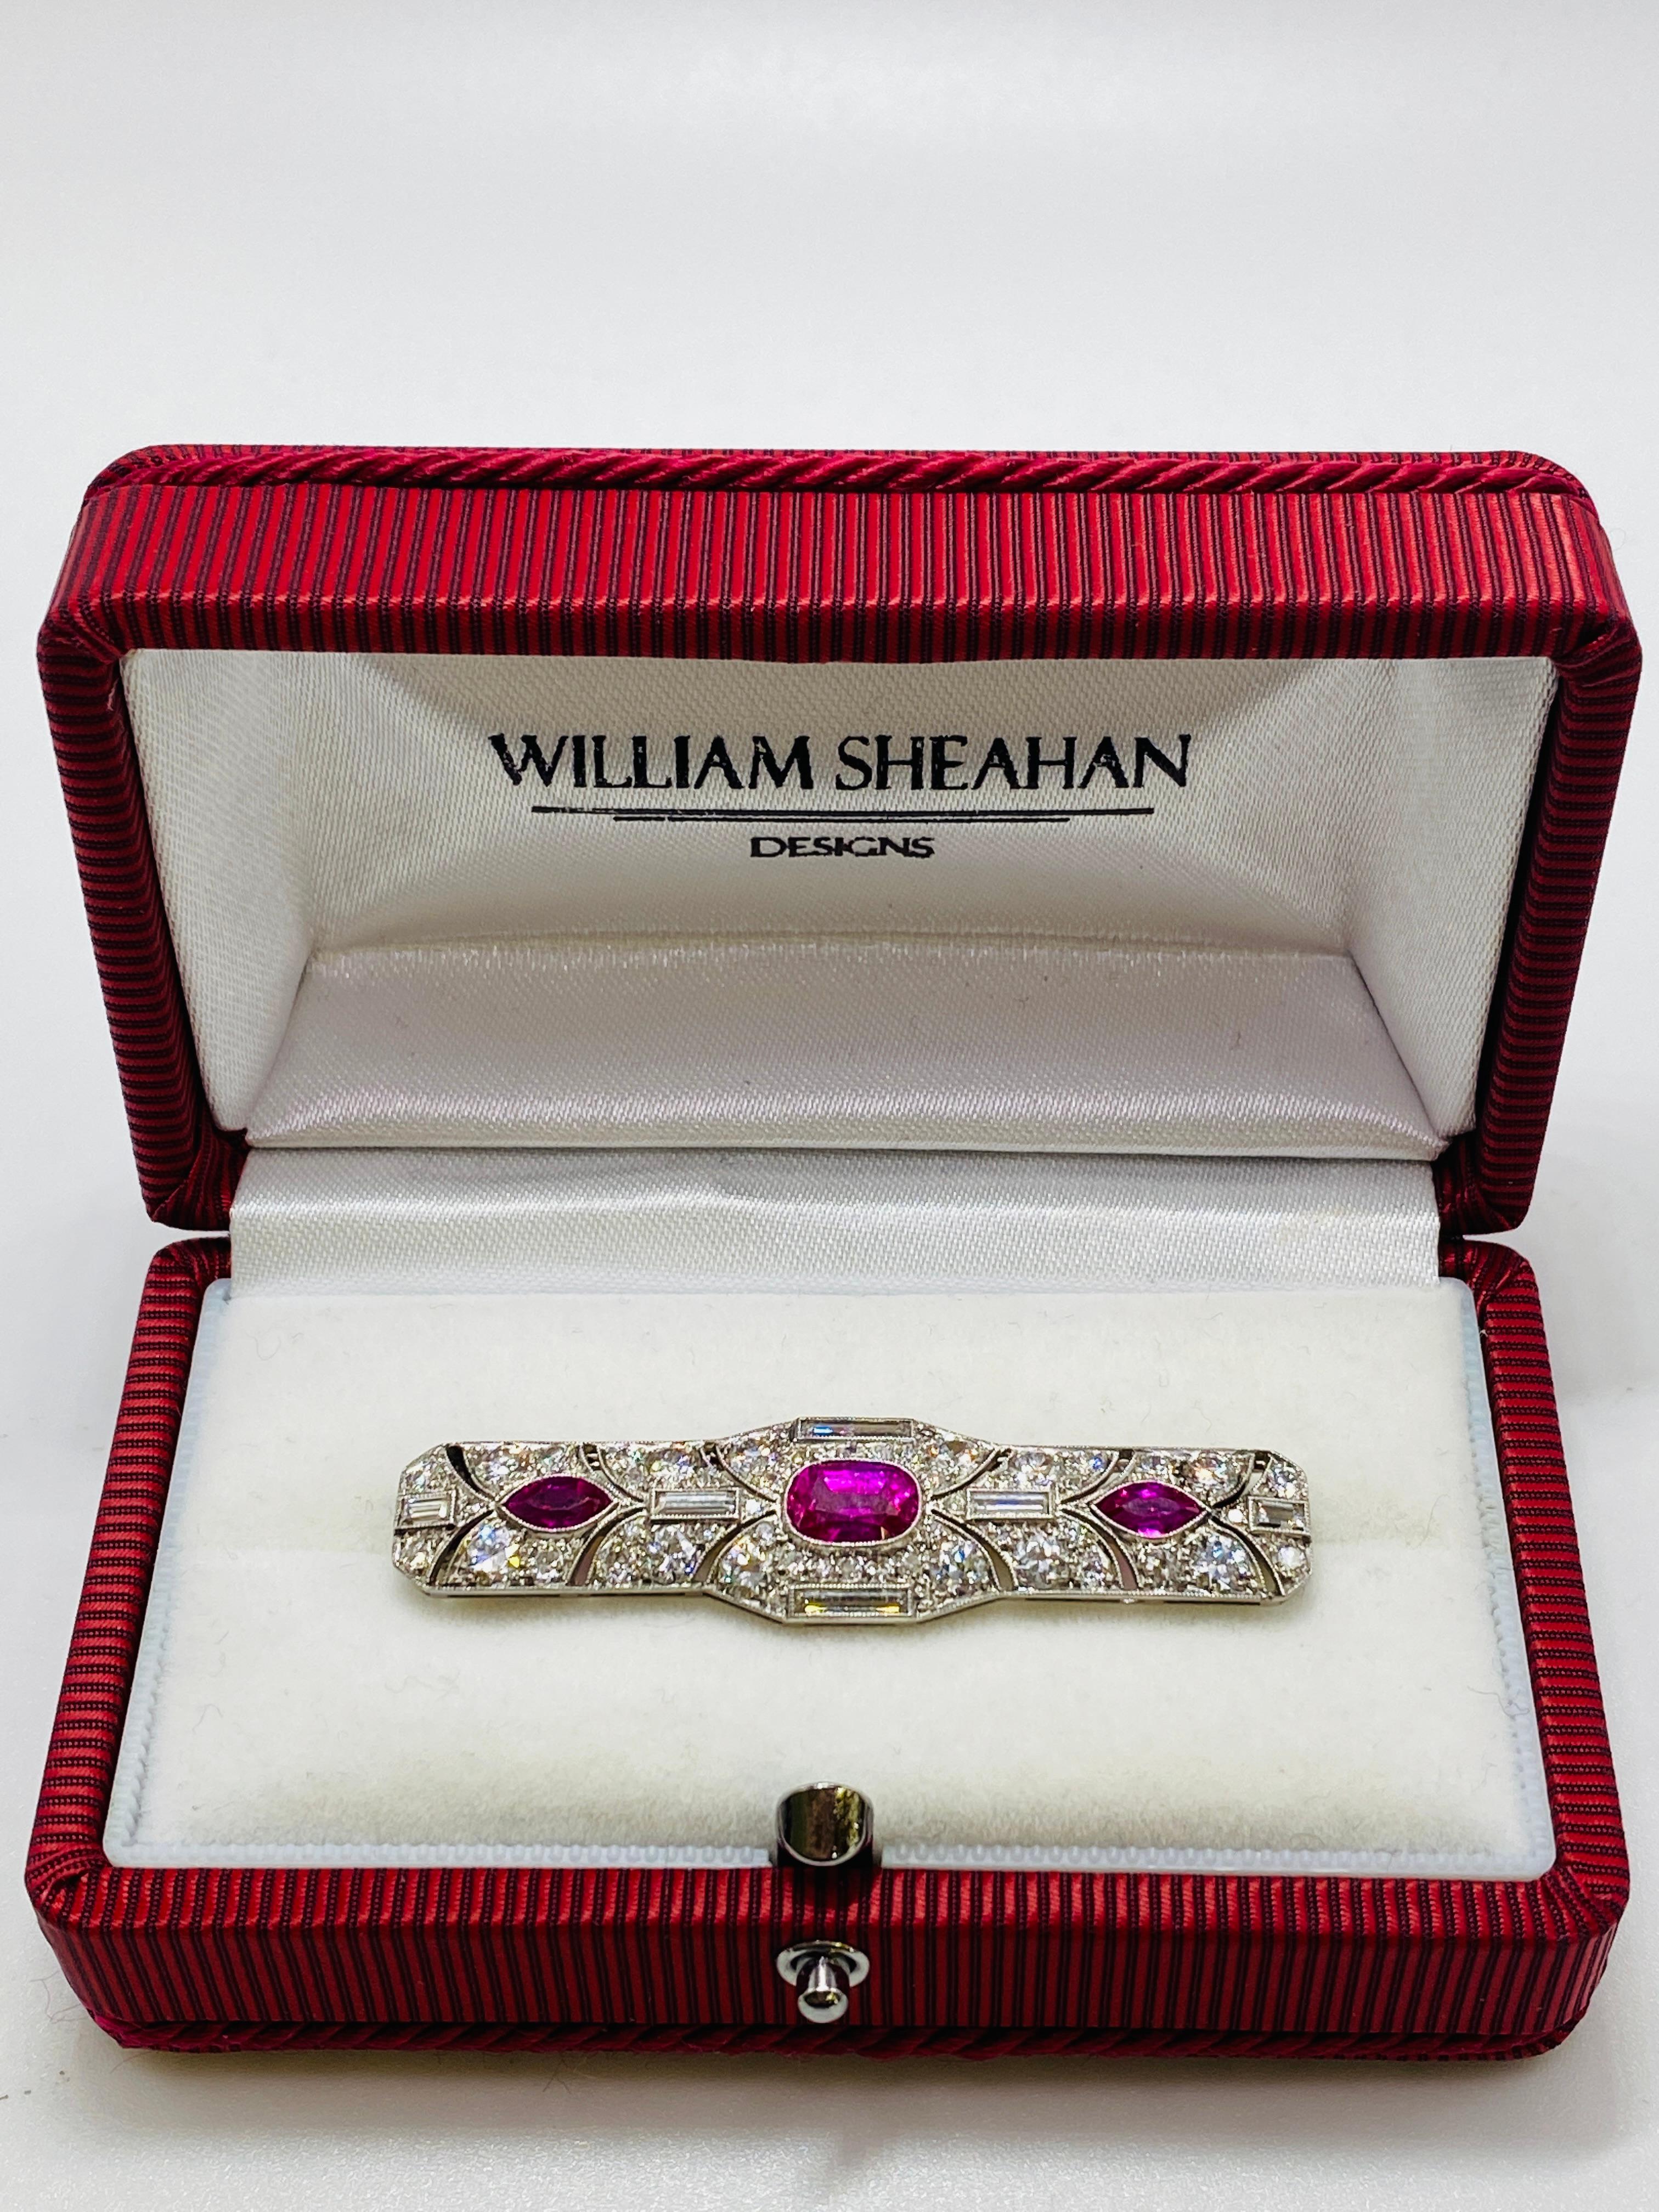 Art Deco Brooch with one 1.32ct Cushion-Cut Unheated Burmese Red Ruby, 2=0.68tw Marquise Cut Red Rubies, 6=0.56tw Baguette Diamonds, 54=2.04tw Old European Cut Diamonds. AGL report available for center 1.32ct unheated Burmese ruby. 